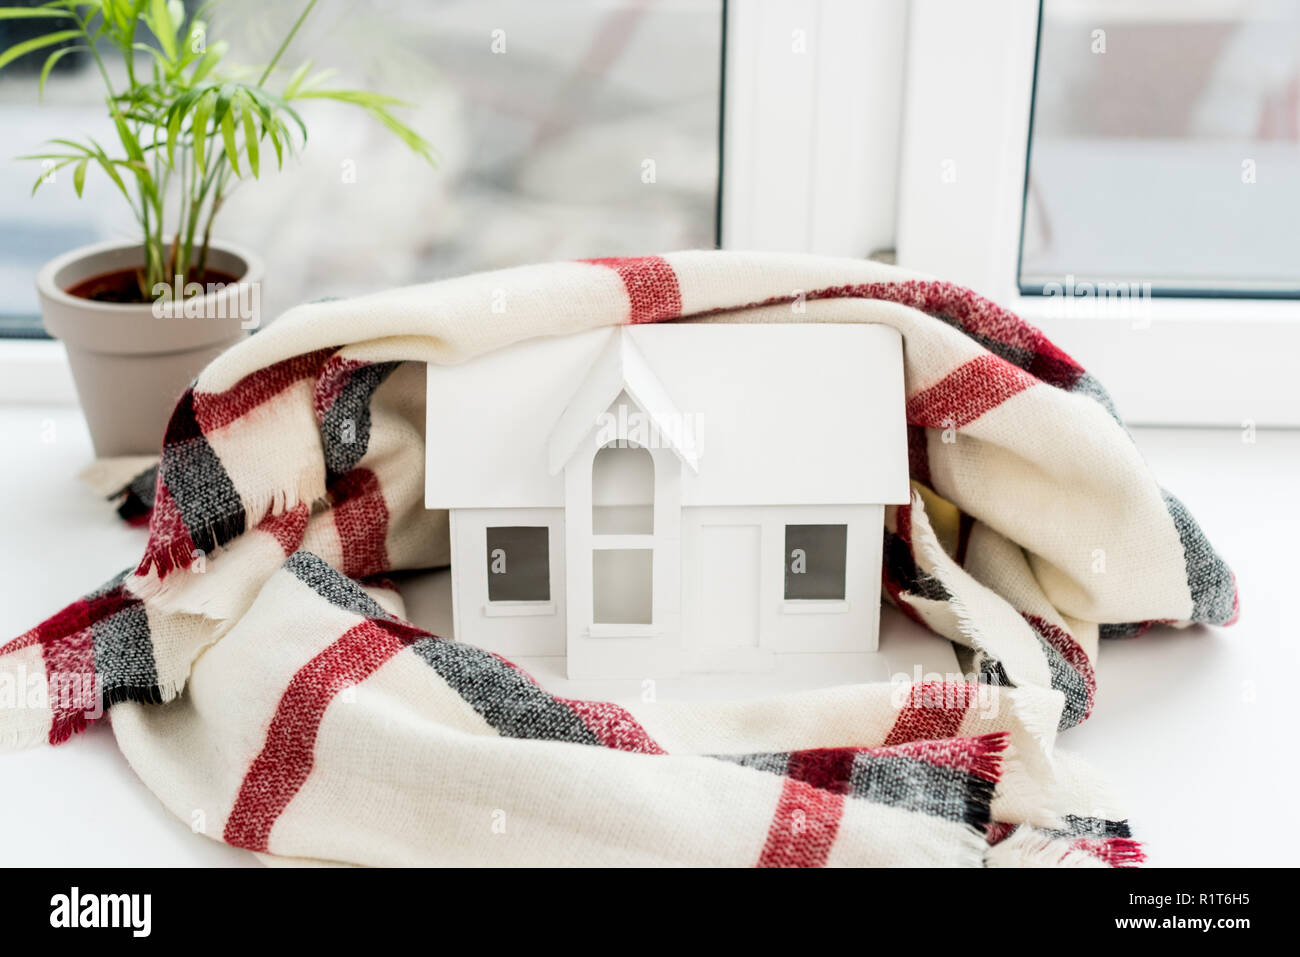 close-up shot of toy house model with plaid on windowsill Stock Photo